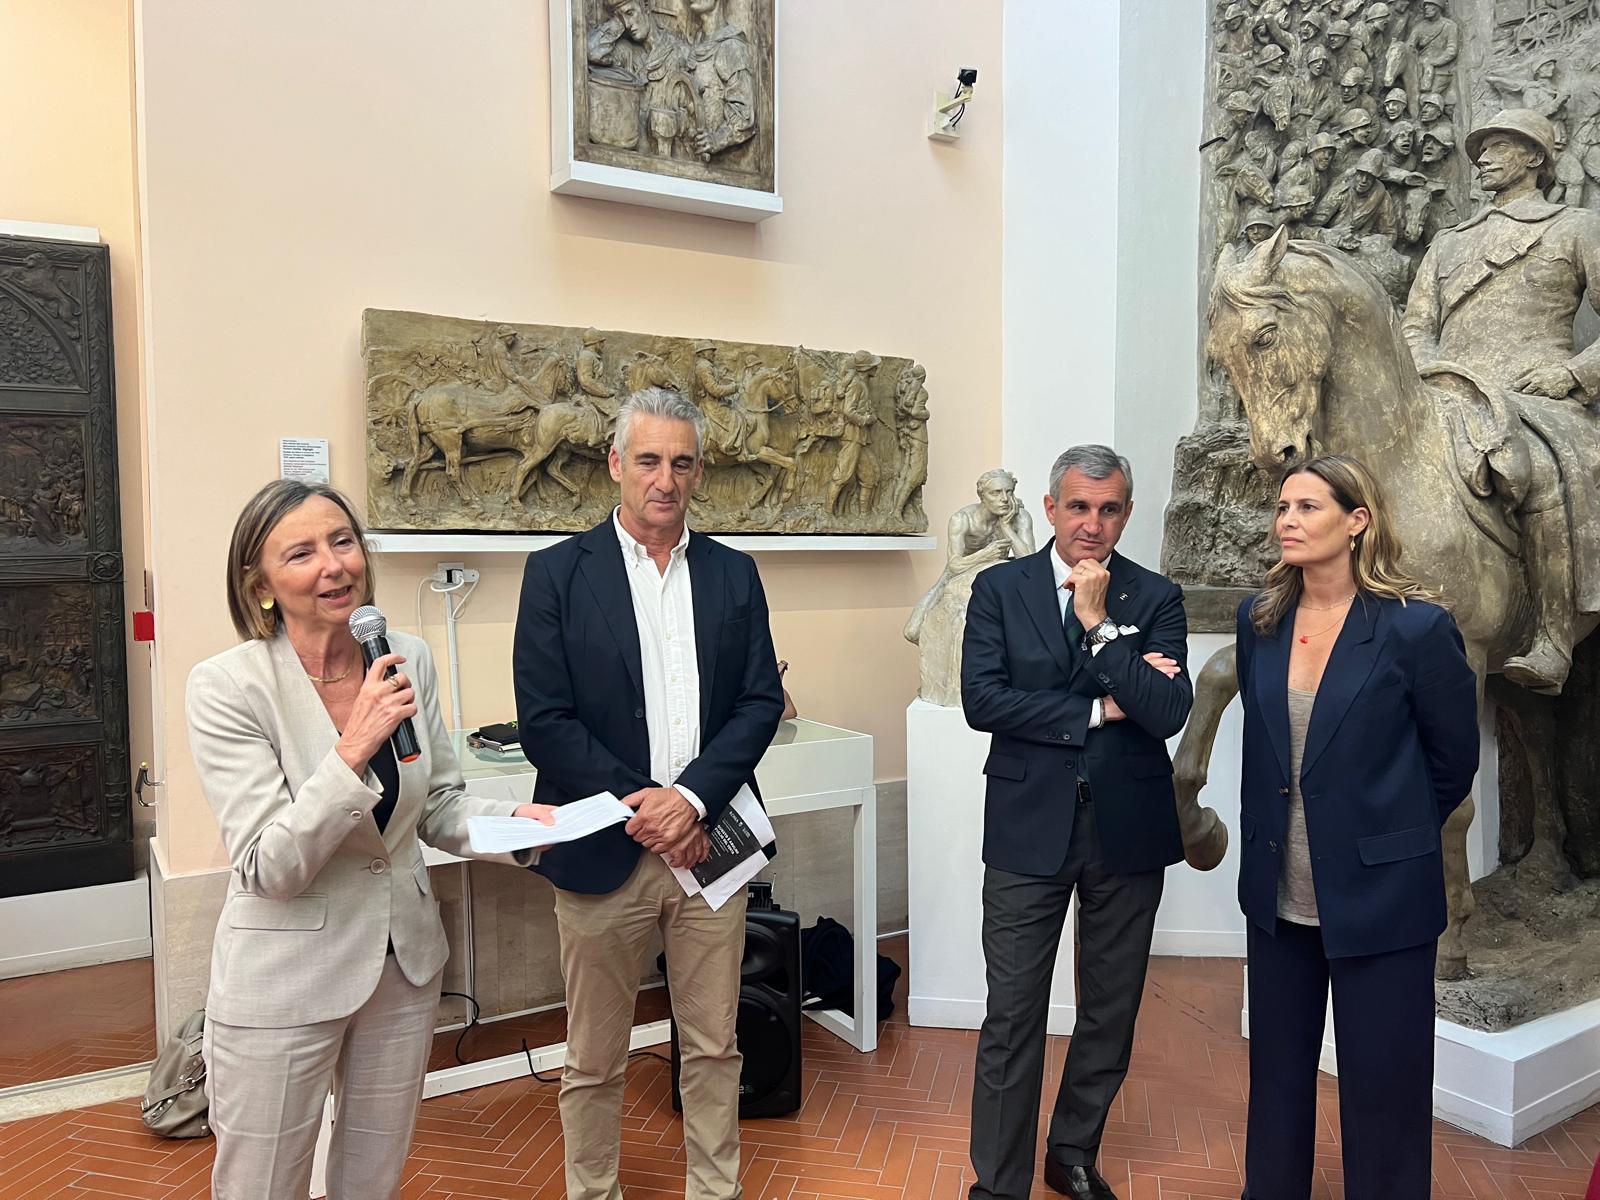 Piazza di Siena, exhibition 'This is Aquilino, son of the wind' presented